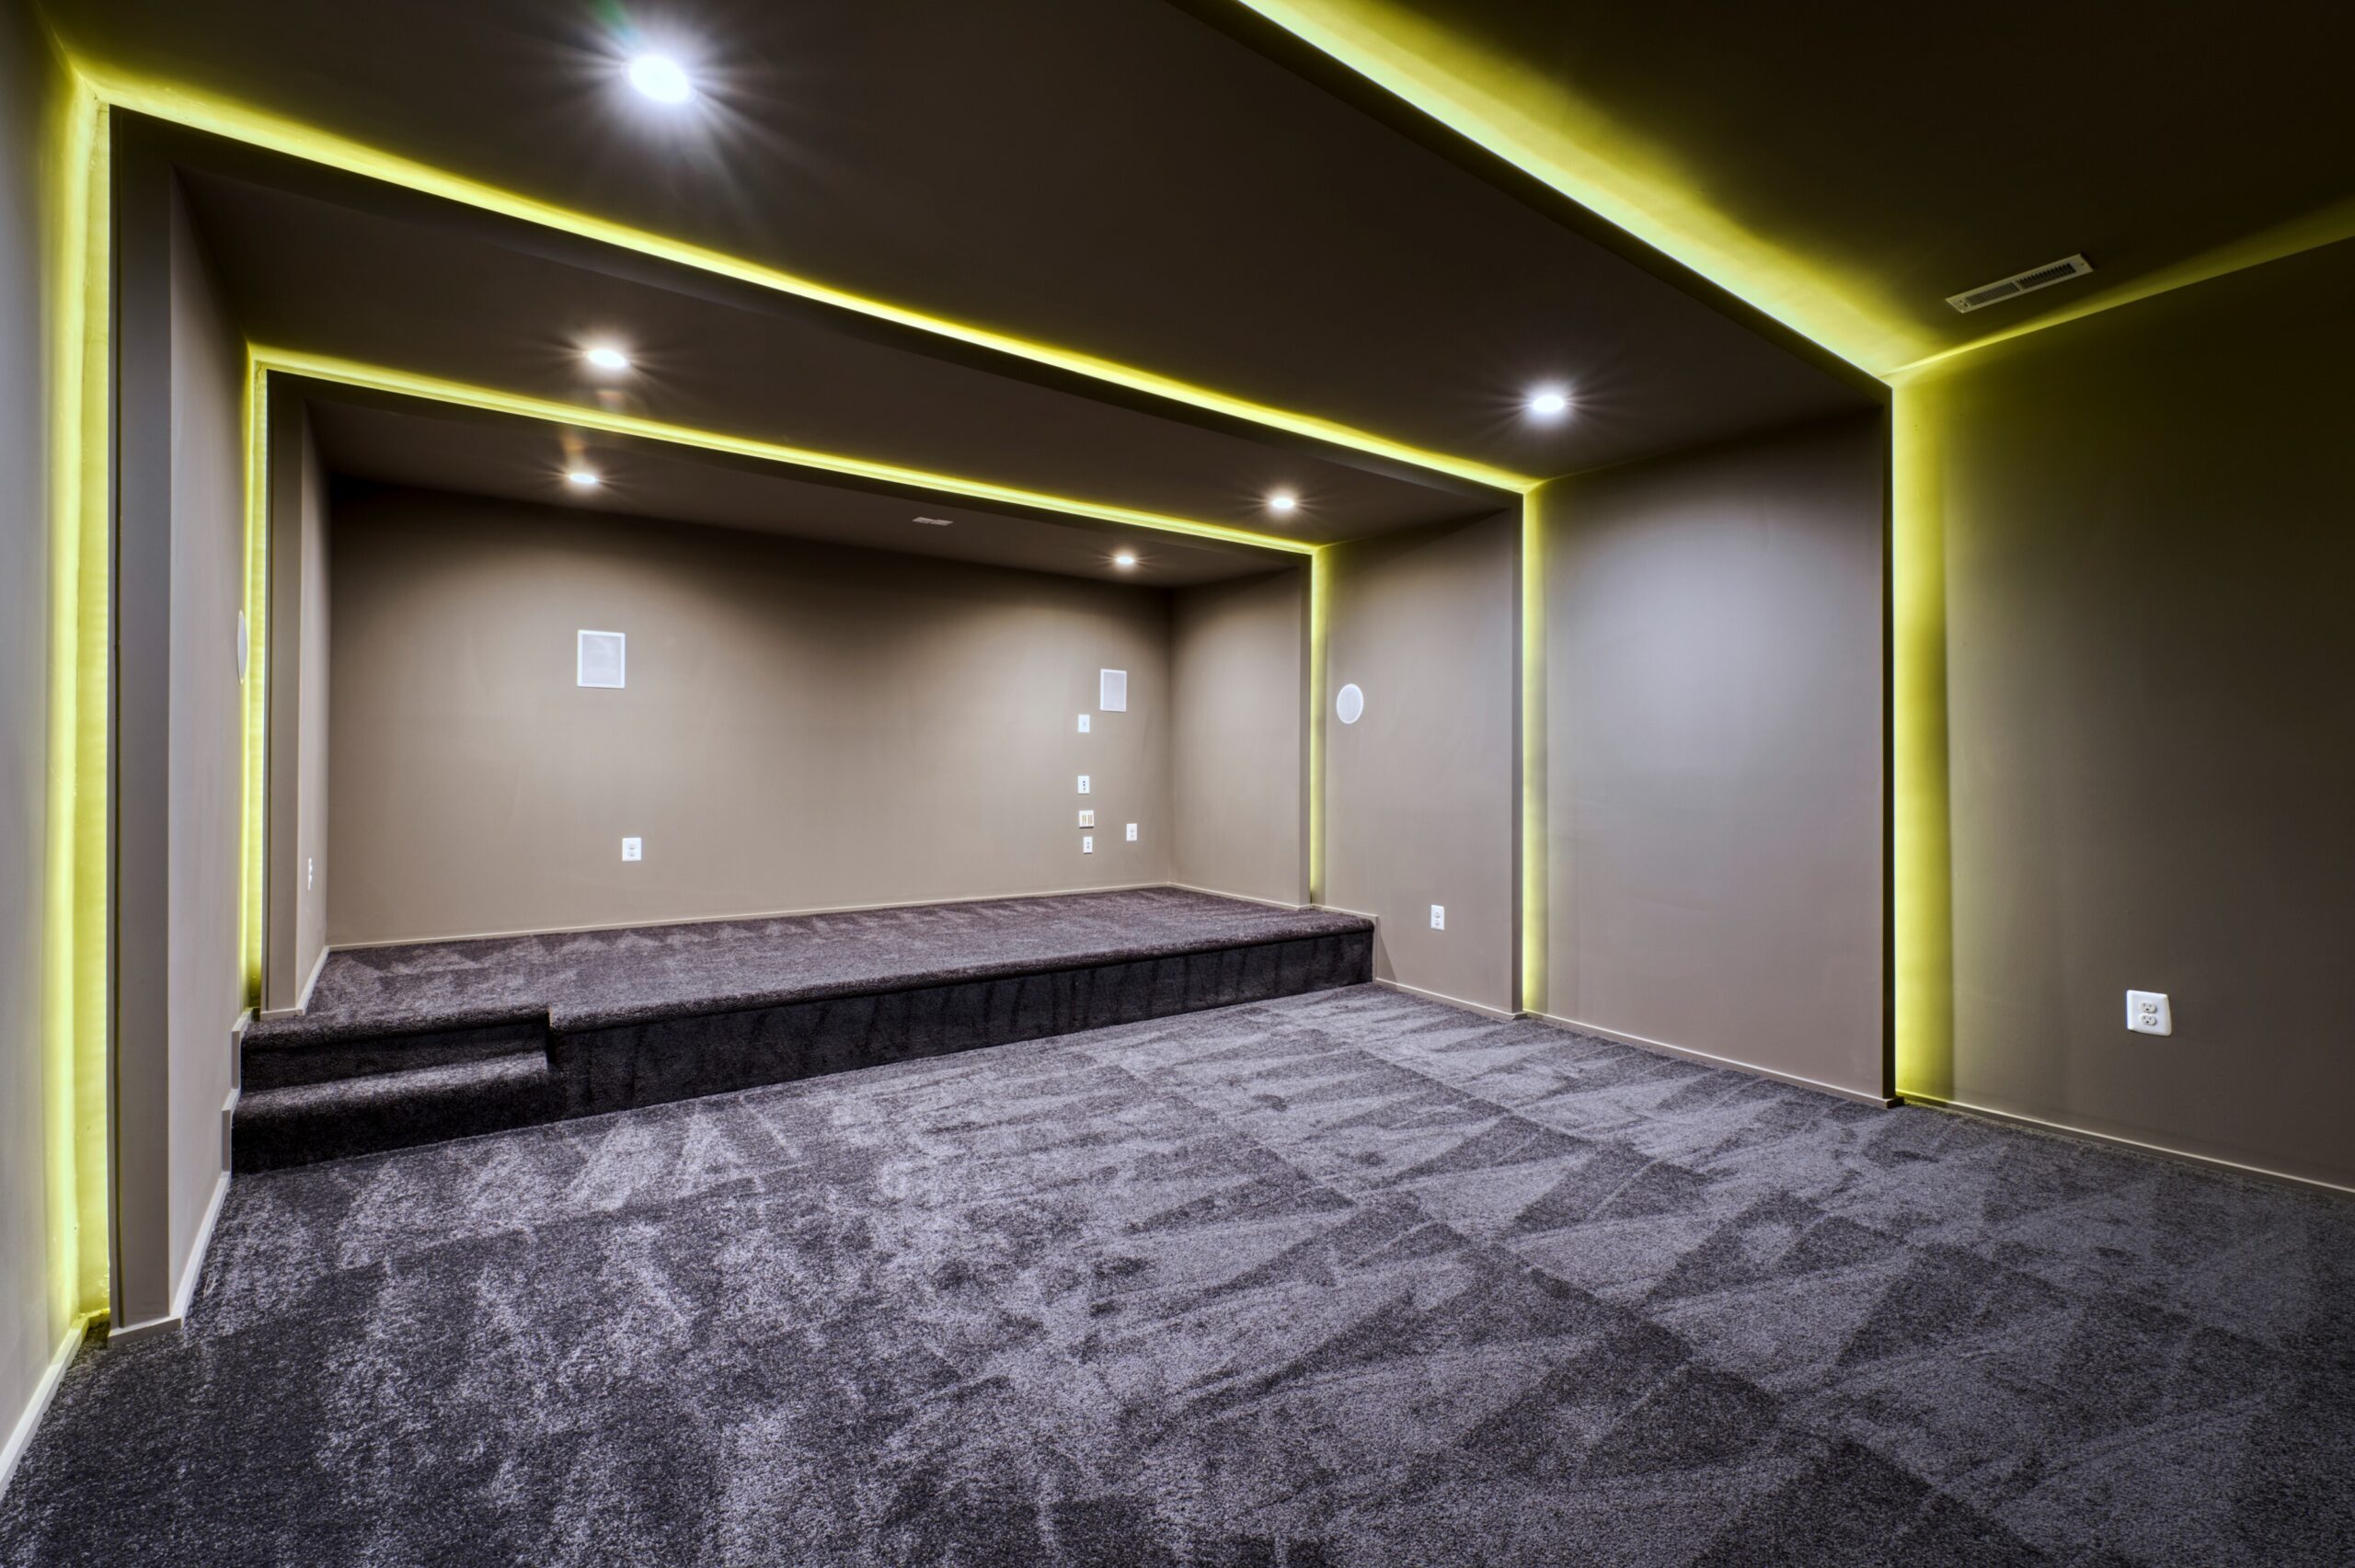 Professional interior photo of new construction home at 3400 N Ohio St - showing the movie theater room with led lighting, plush carpeting and a second tier for the back row of seats